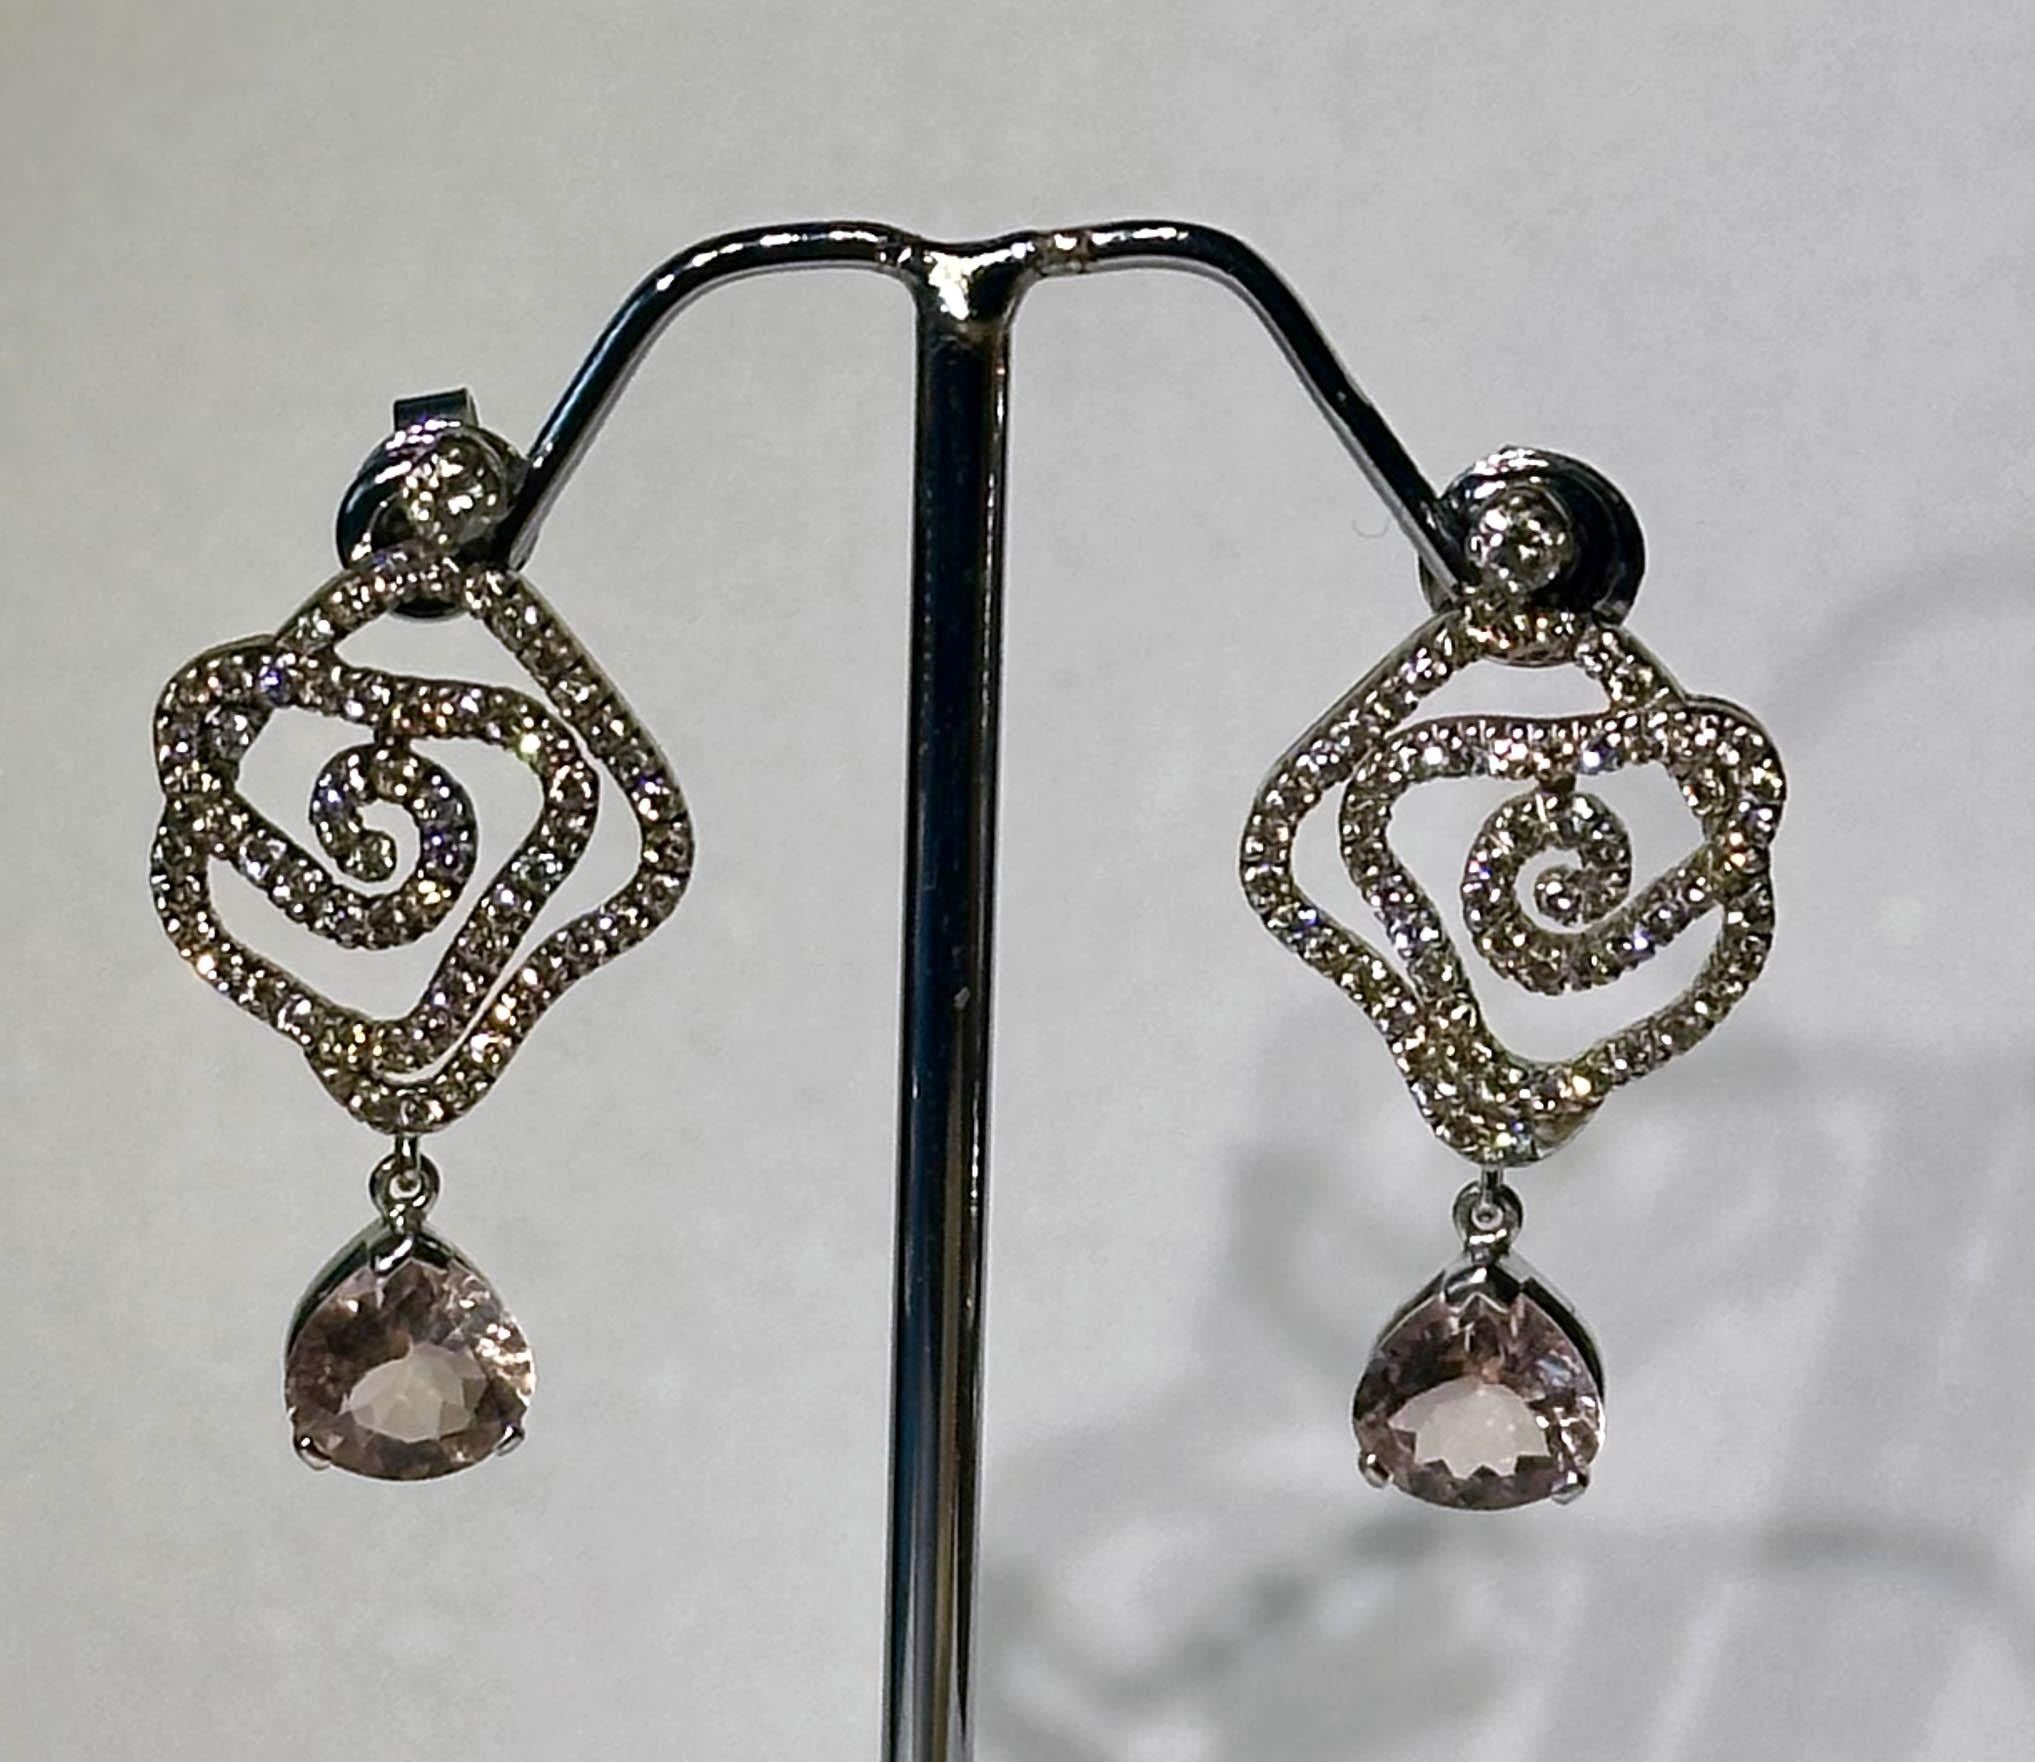 A Pair of Blackened 18kt White Gold Diamond Earrings with Morganite Dangles. 118 1mm round brilliant diamonds SI clarity K color. Two 2.5MM Round Brilliant SI clarity K color, and two Pear Cut Morganites that dangle from the bottom Total Diamond